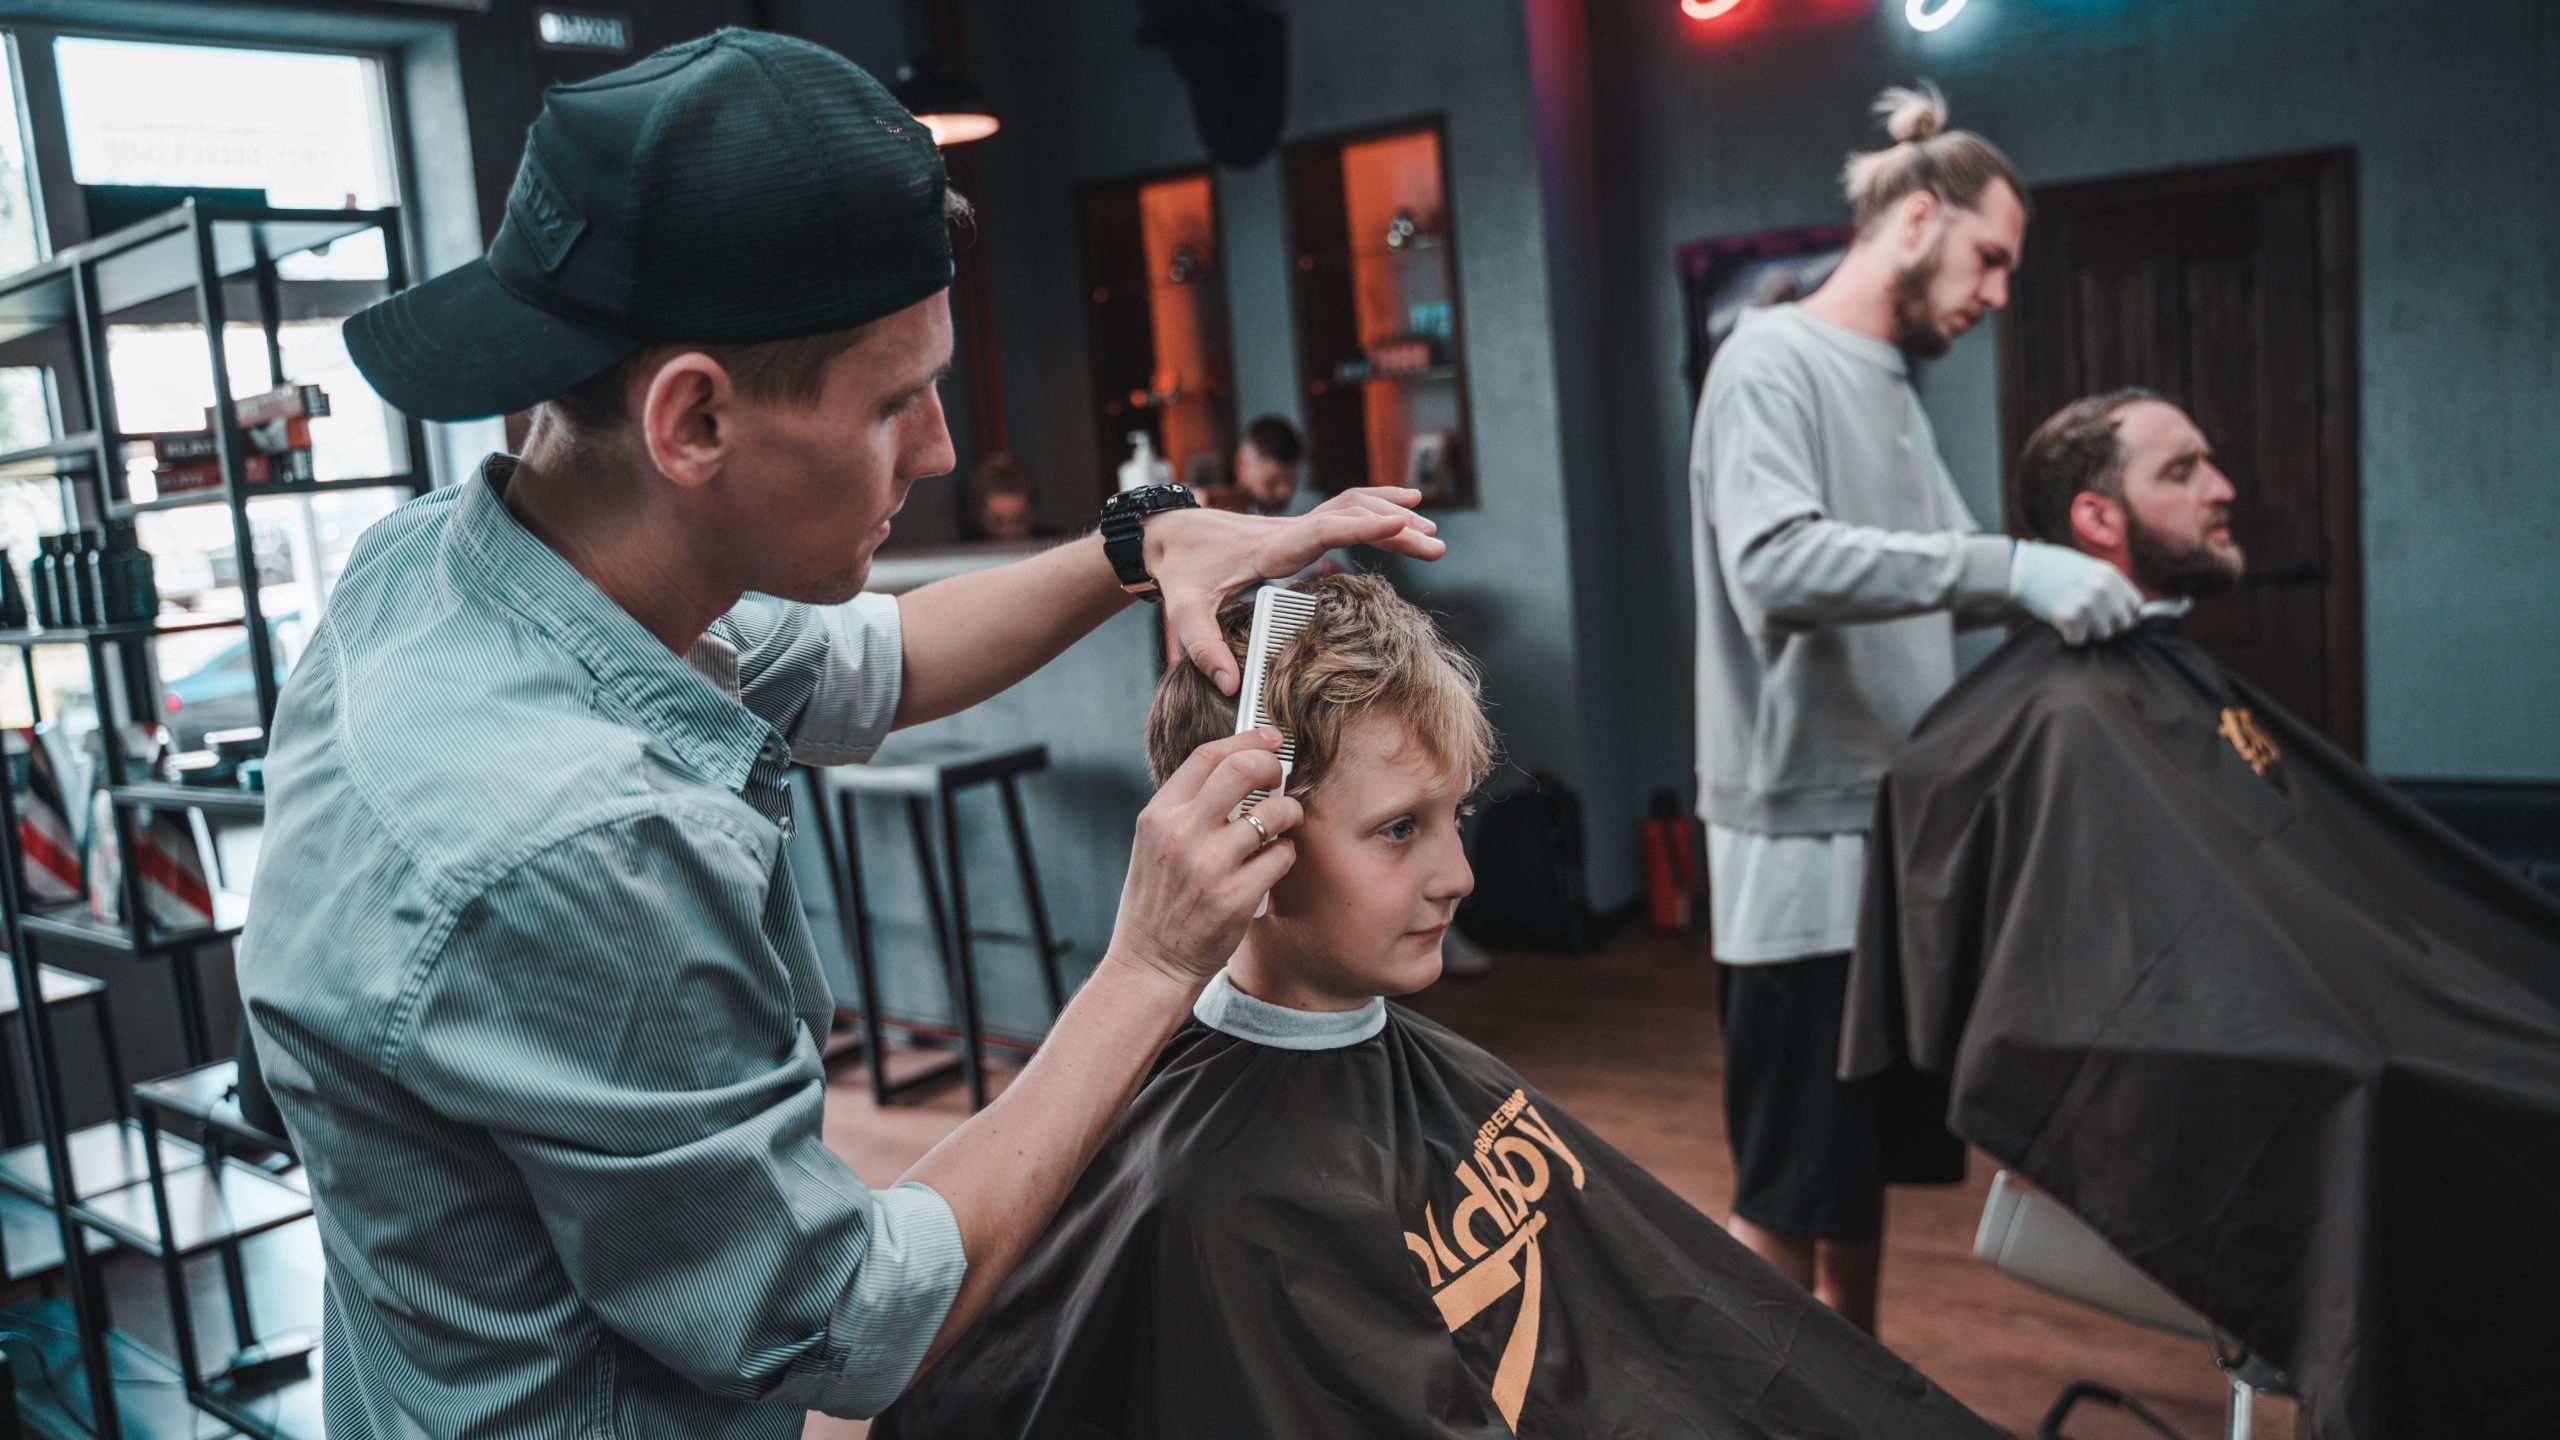 Barbershop reopen for business